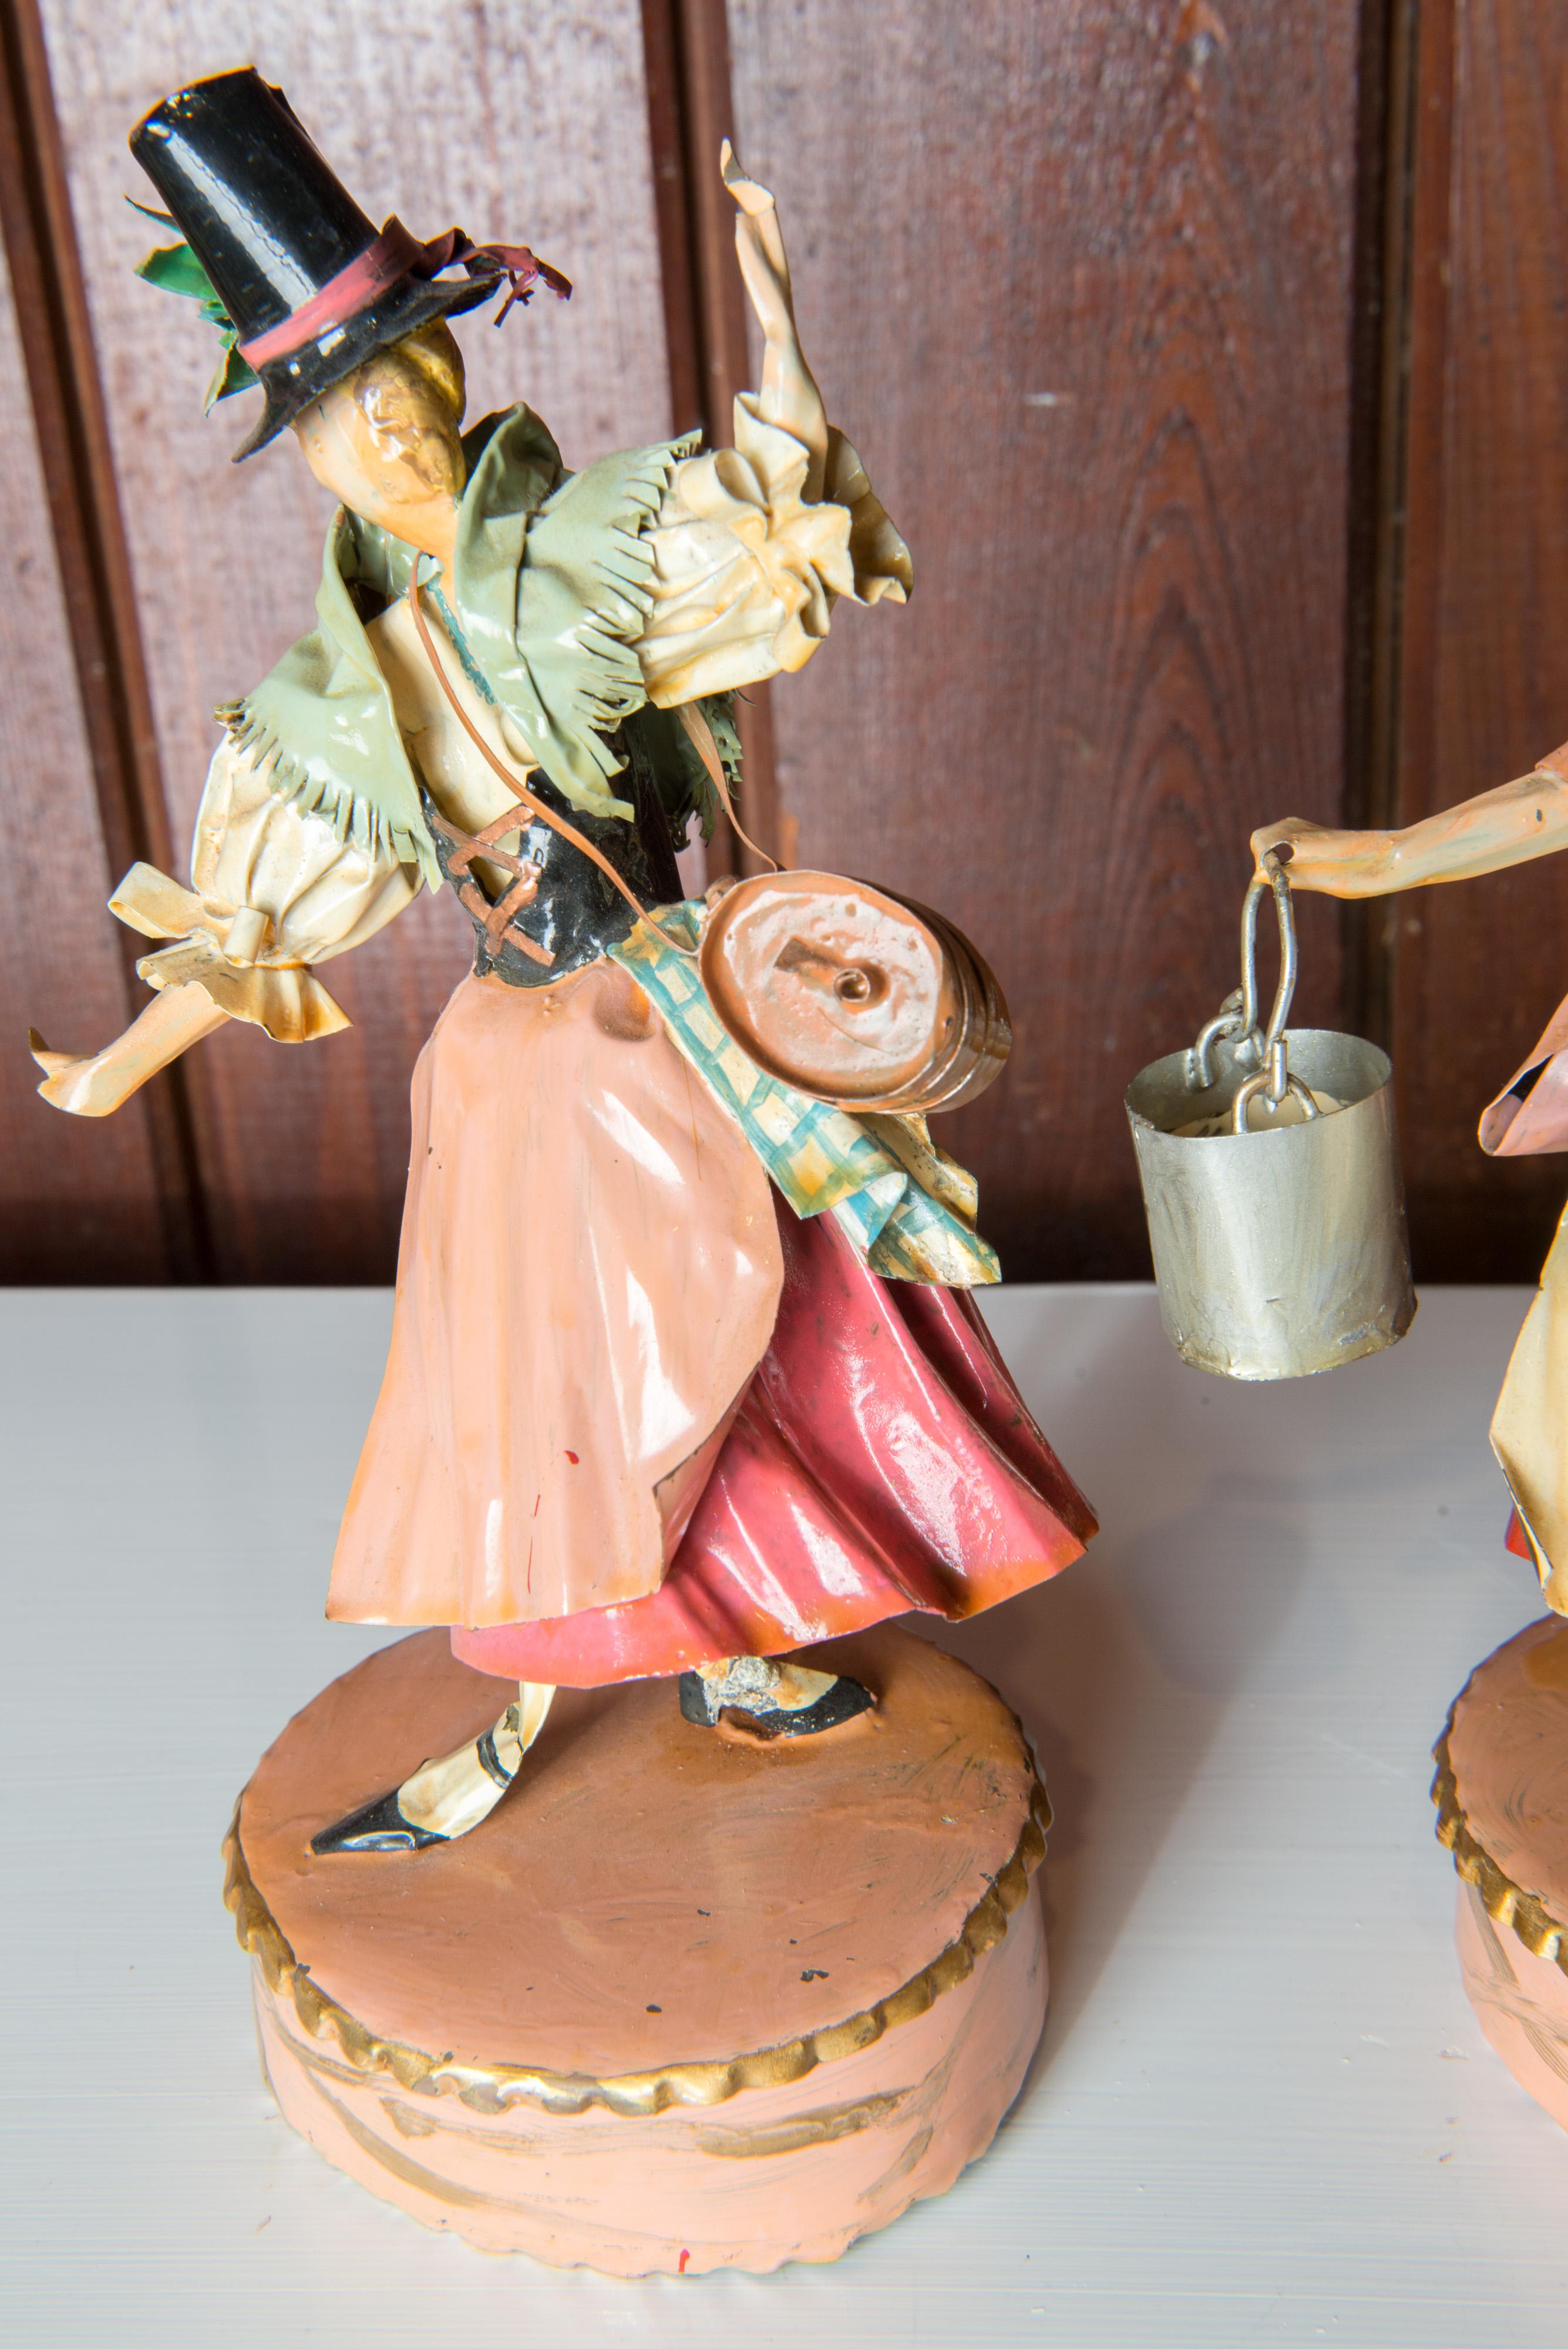 Late 20th Century Pair of Lee Menichetti Sculptures: Tyrolean Maid & German Milk Maid For Sale